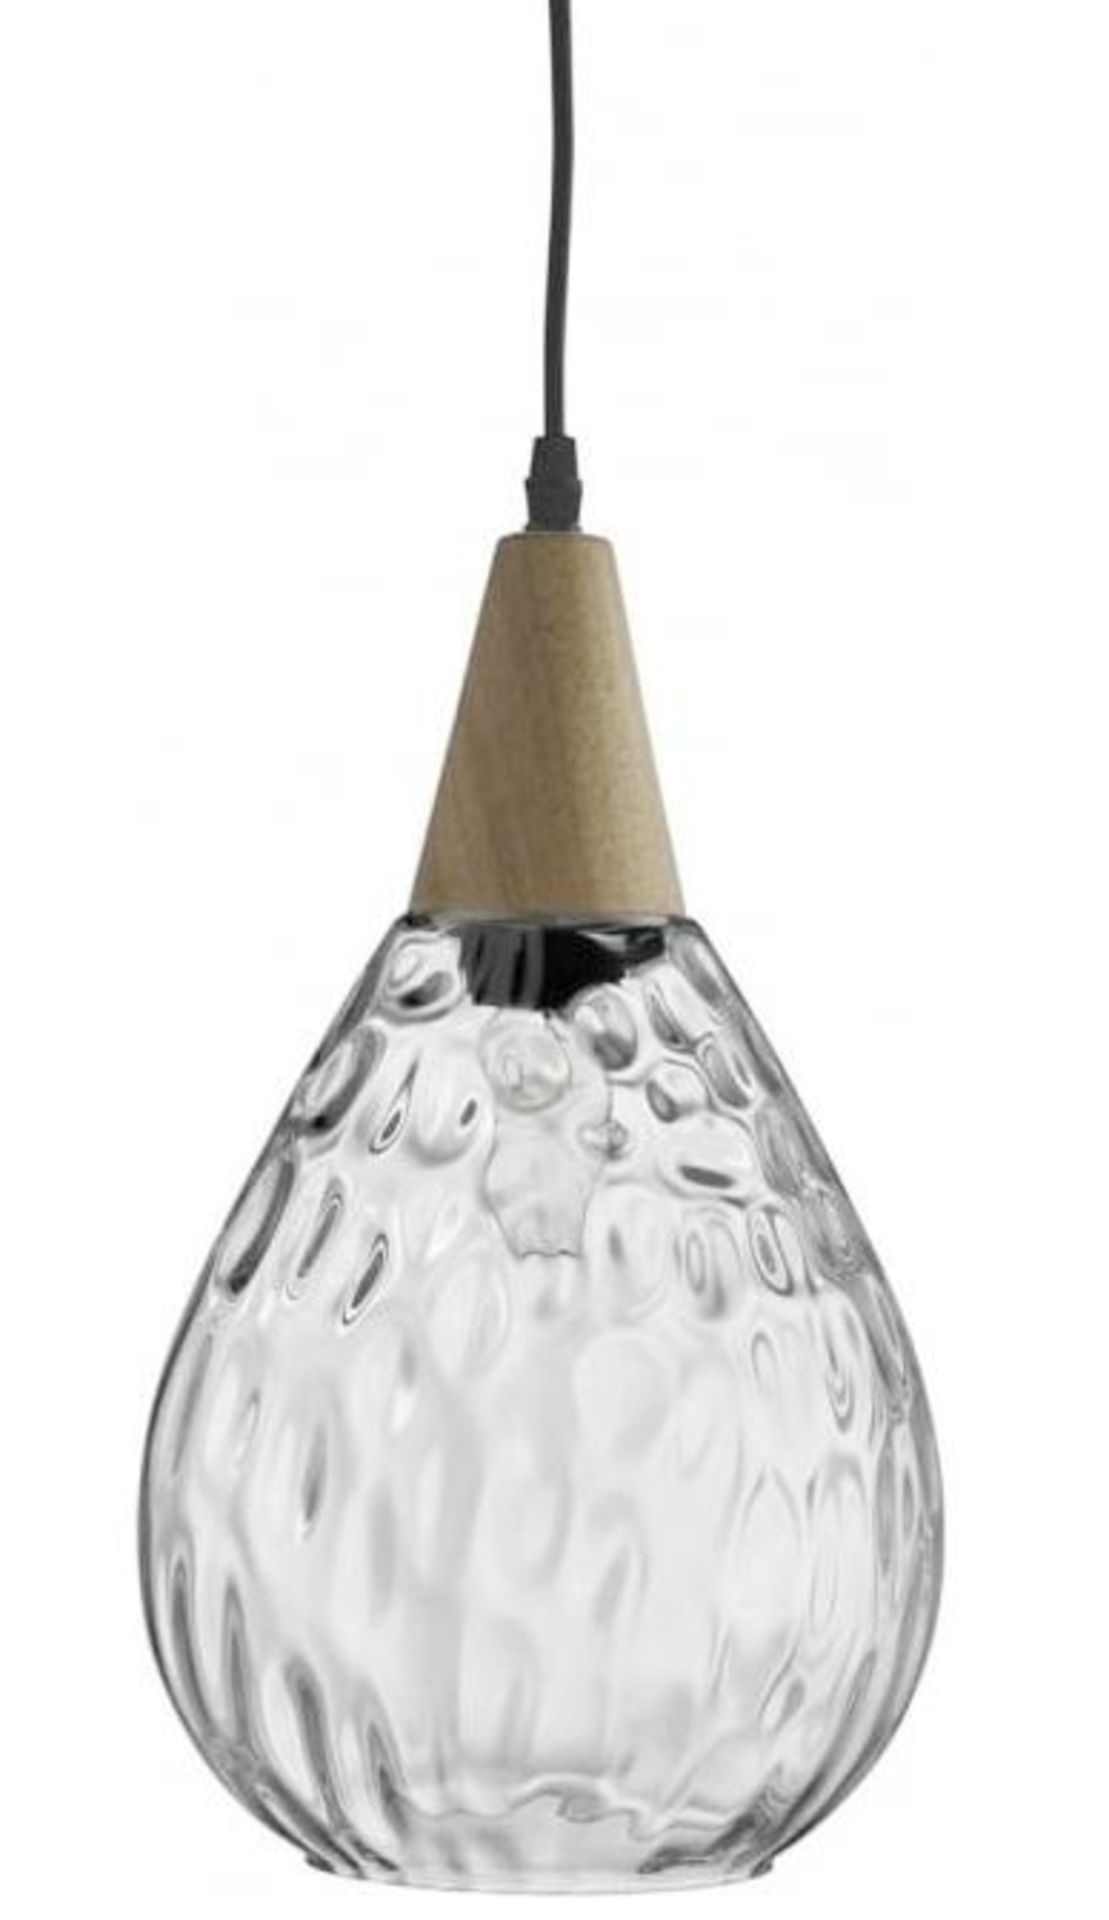 1 x Indiana Single Light Ceiling Pendant With Clear Glass Shade And Wood Finish - New Boxed Stock -